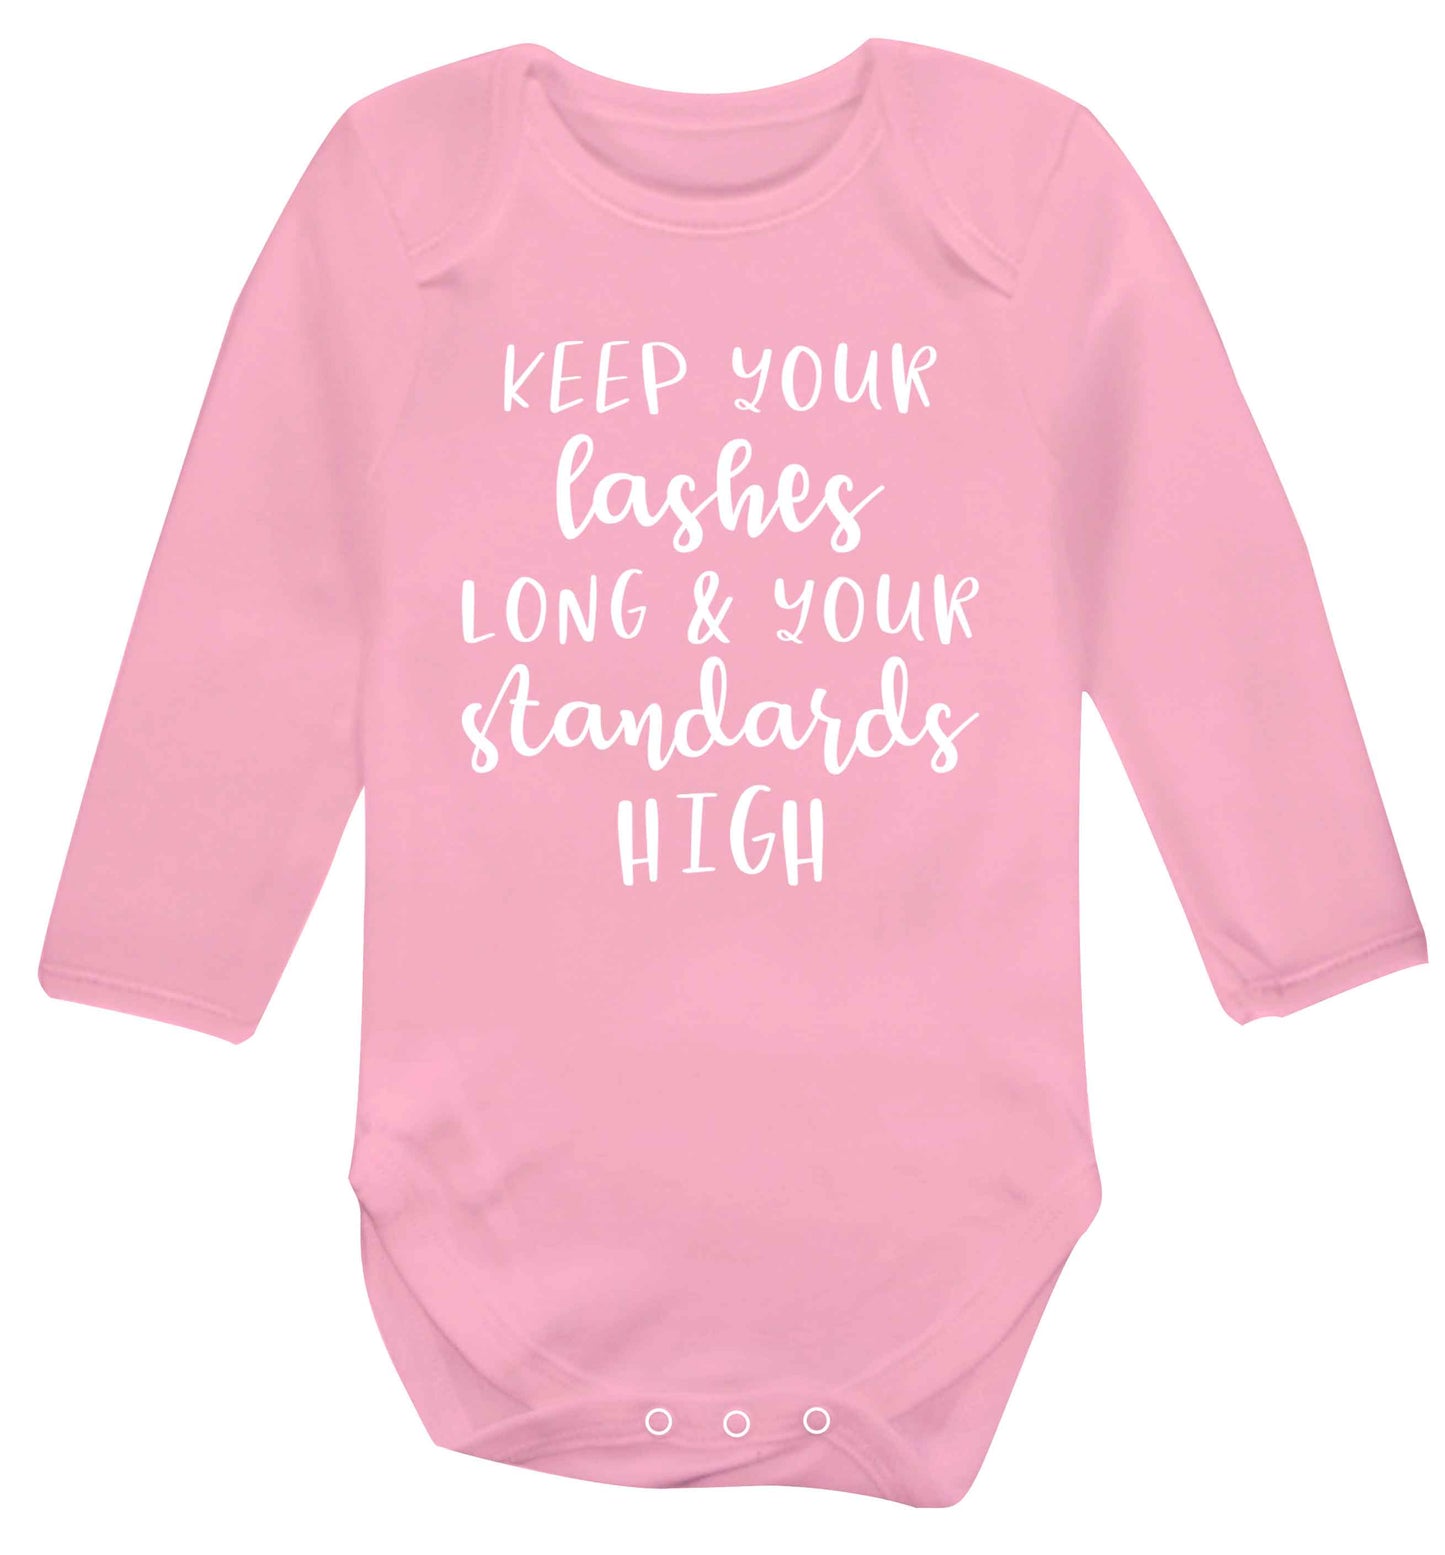 Keep your lashes long and your standards high Baby Vest long sleeved pale pink 6-12 months